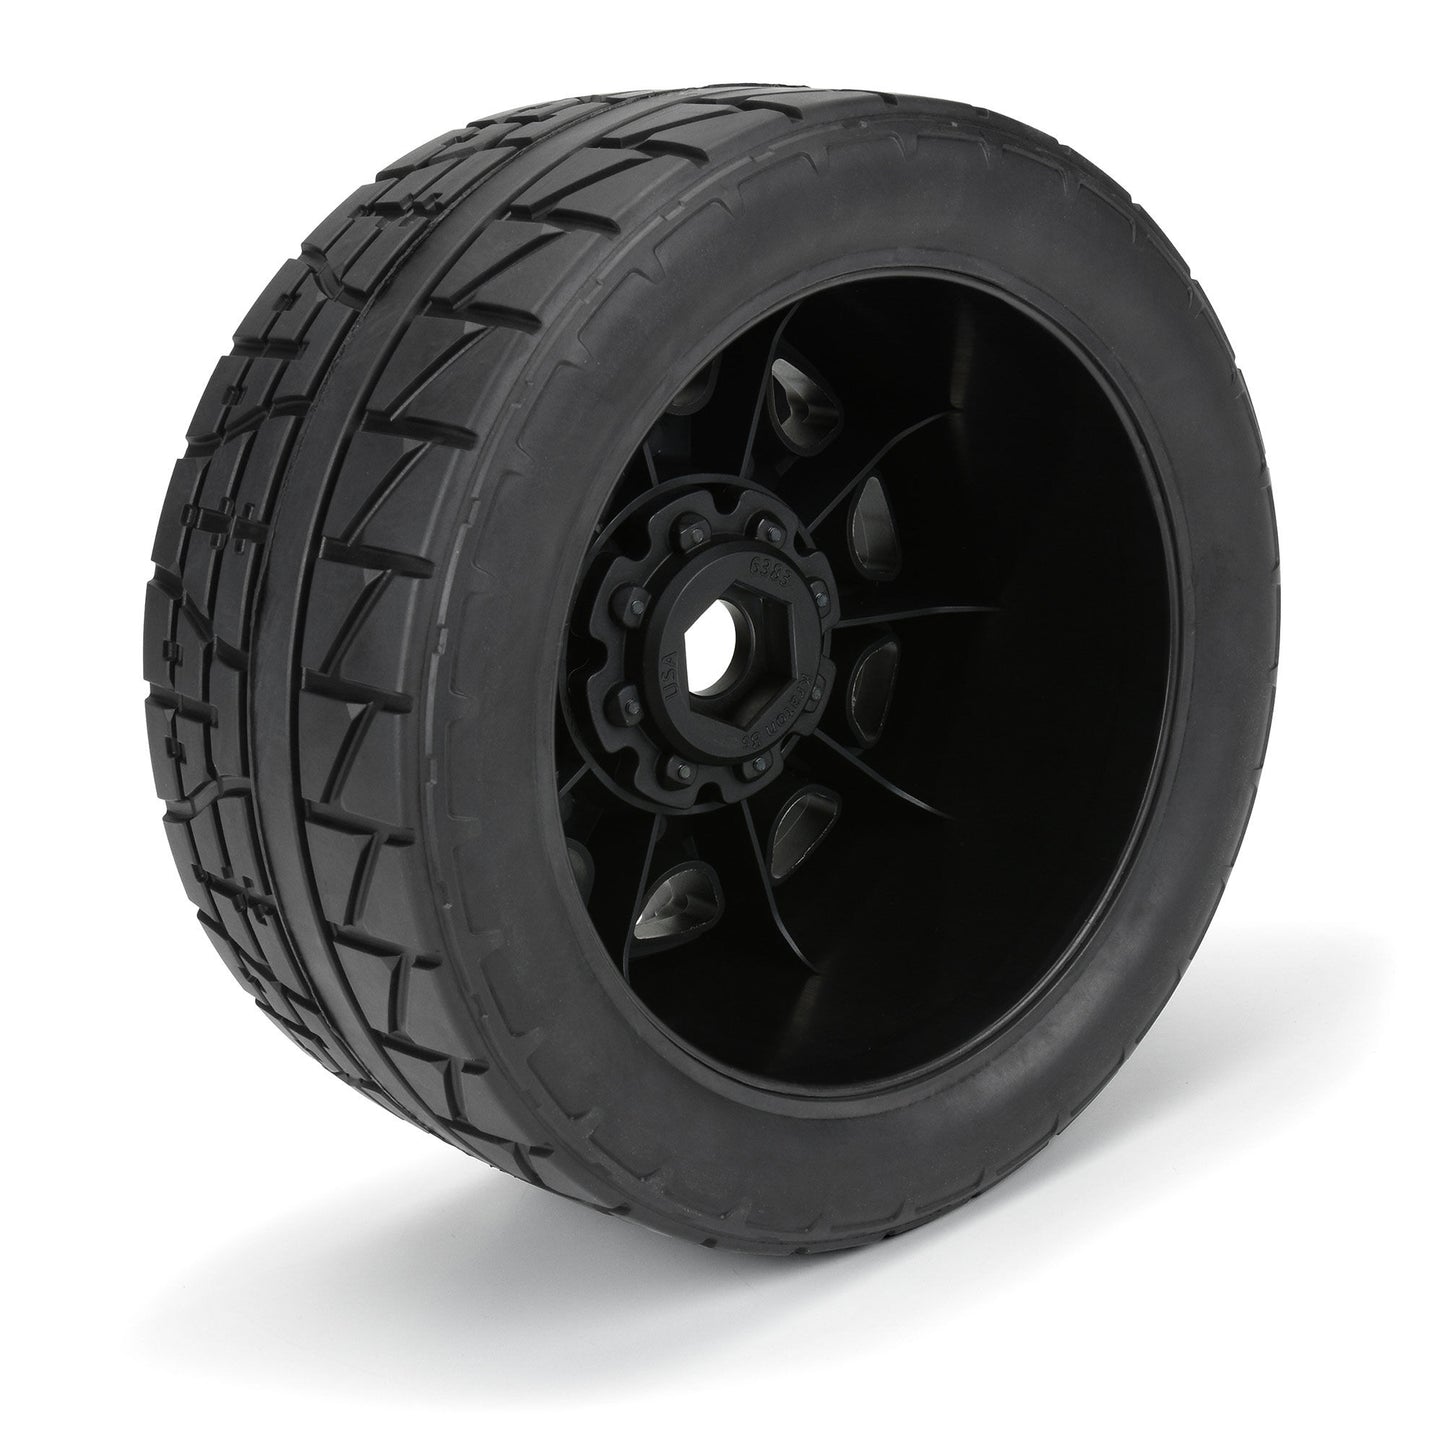 Menace HP 5.7” Street BELTED Tires Mounted on Raid Black 8x48 Removable 24mm Hex Wheels (2) for X-MAXX, KRATON 8S & Other Large Vehicles Front or Rear